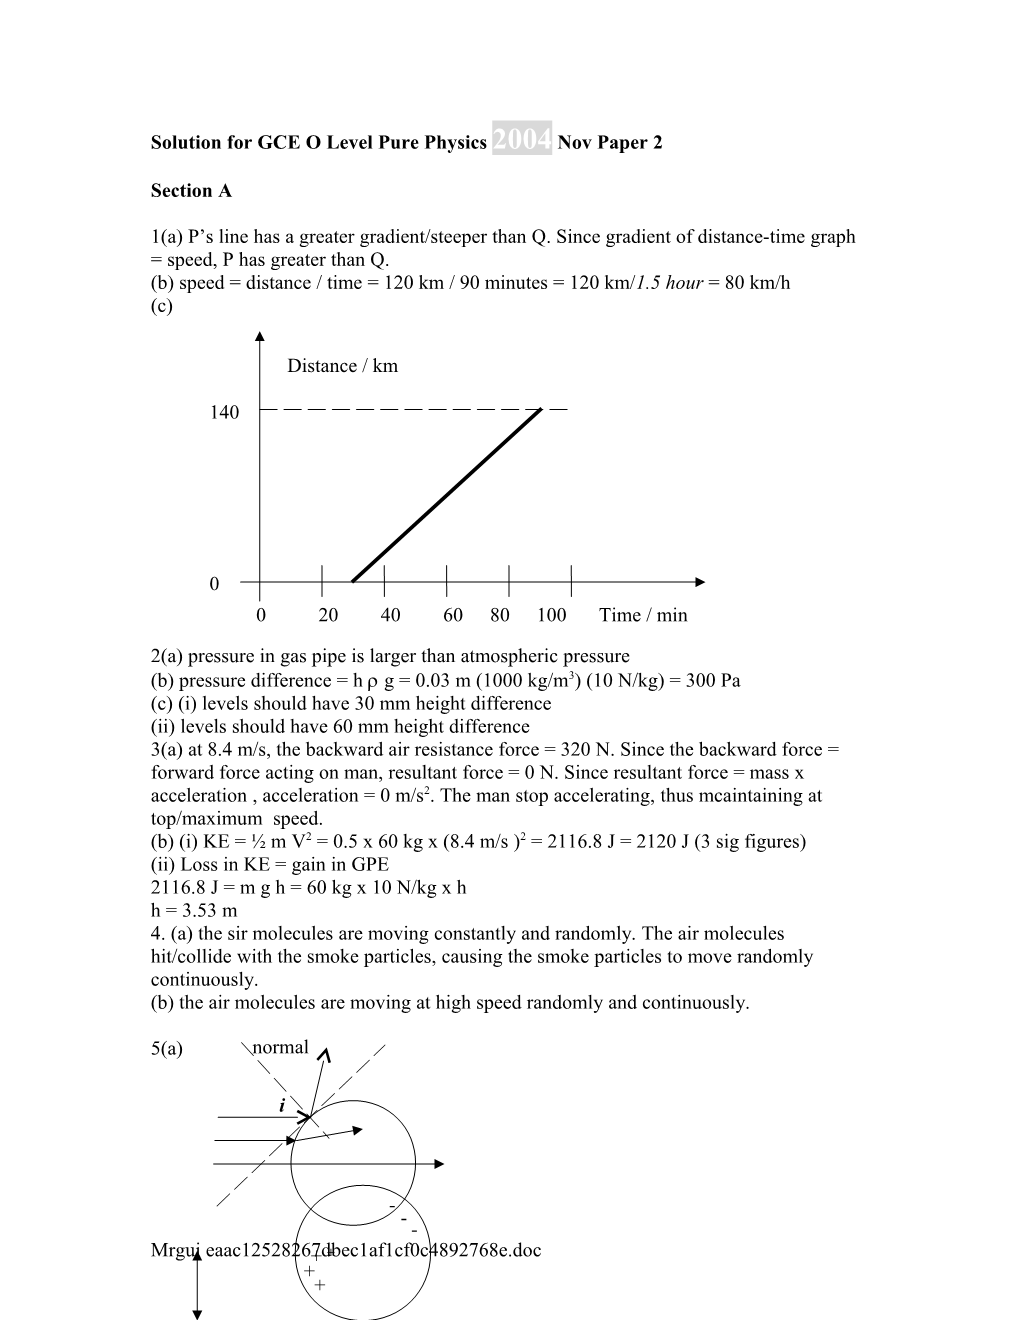 Solution for GCE O Level Pure Physics 2004 Nov Paper 2